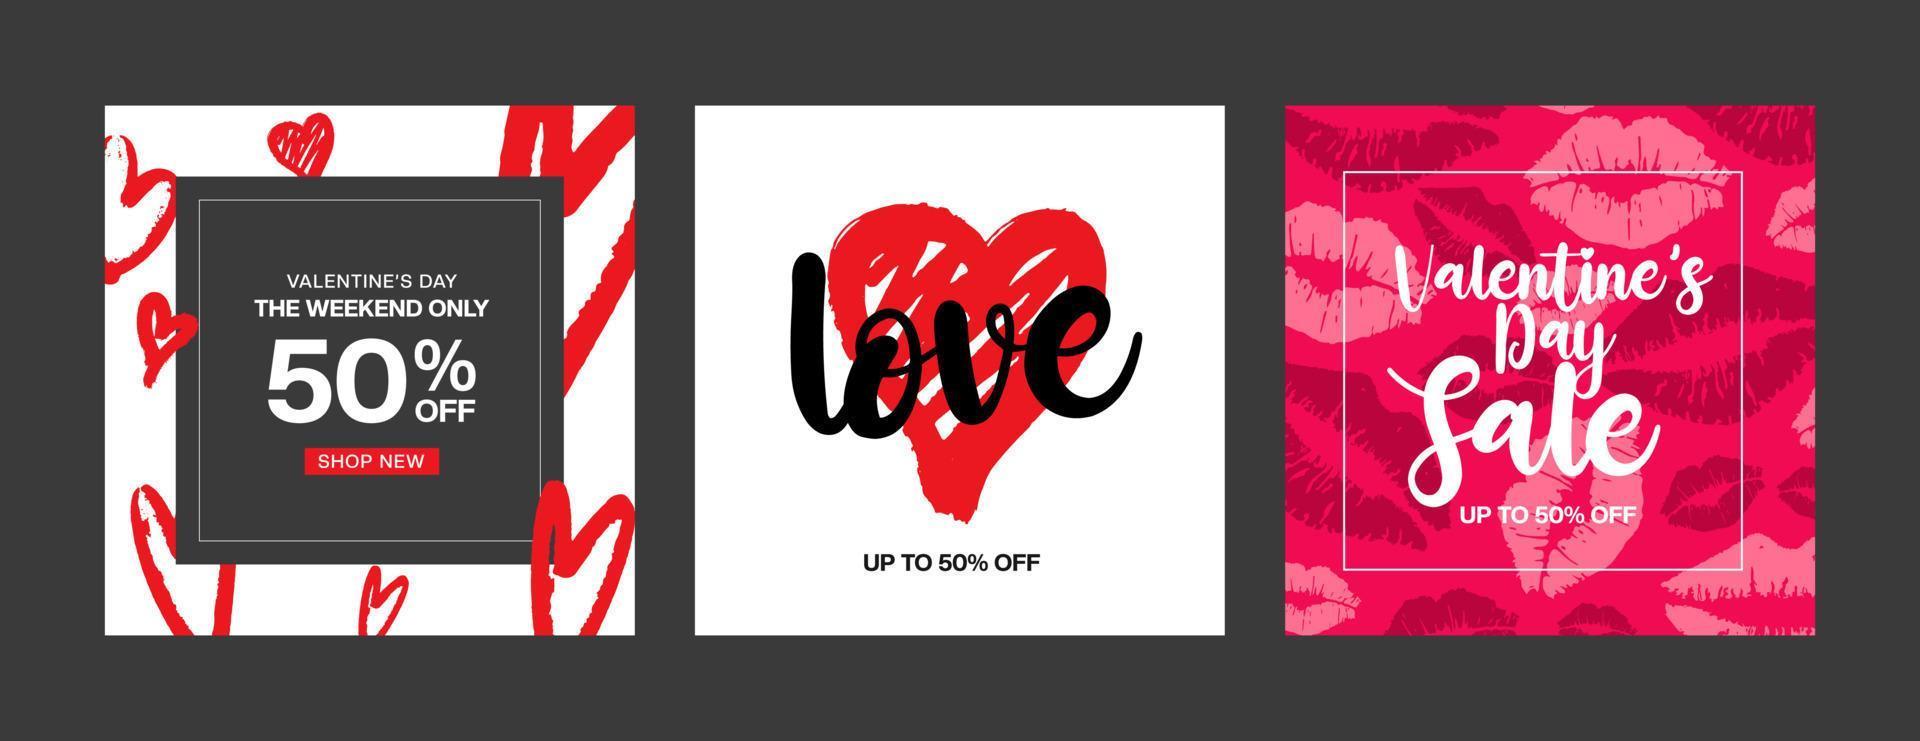 Hand drawn style valentines day sale post set vector